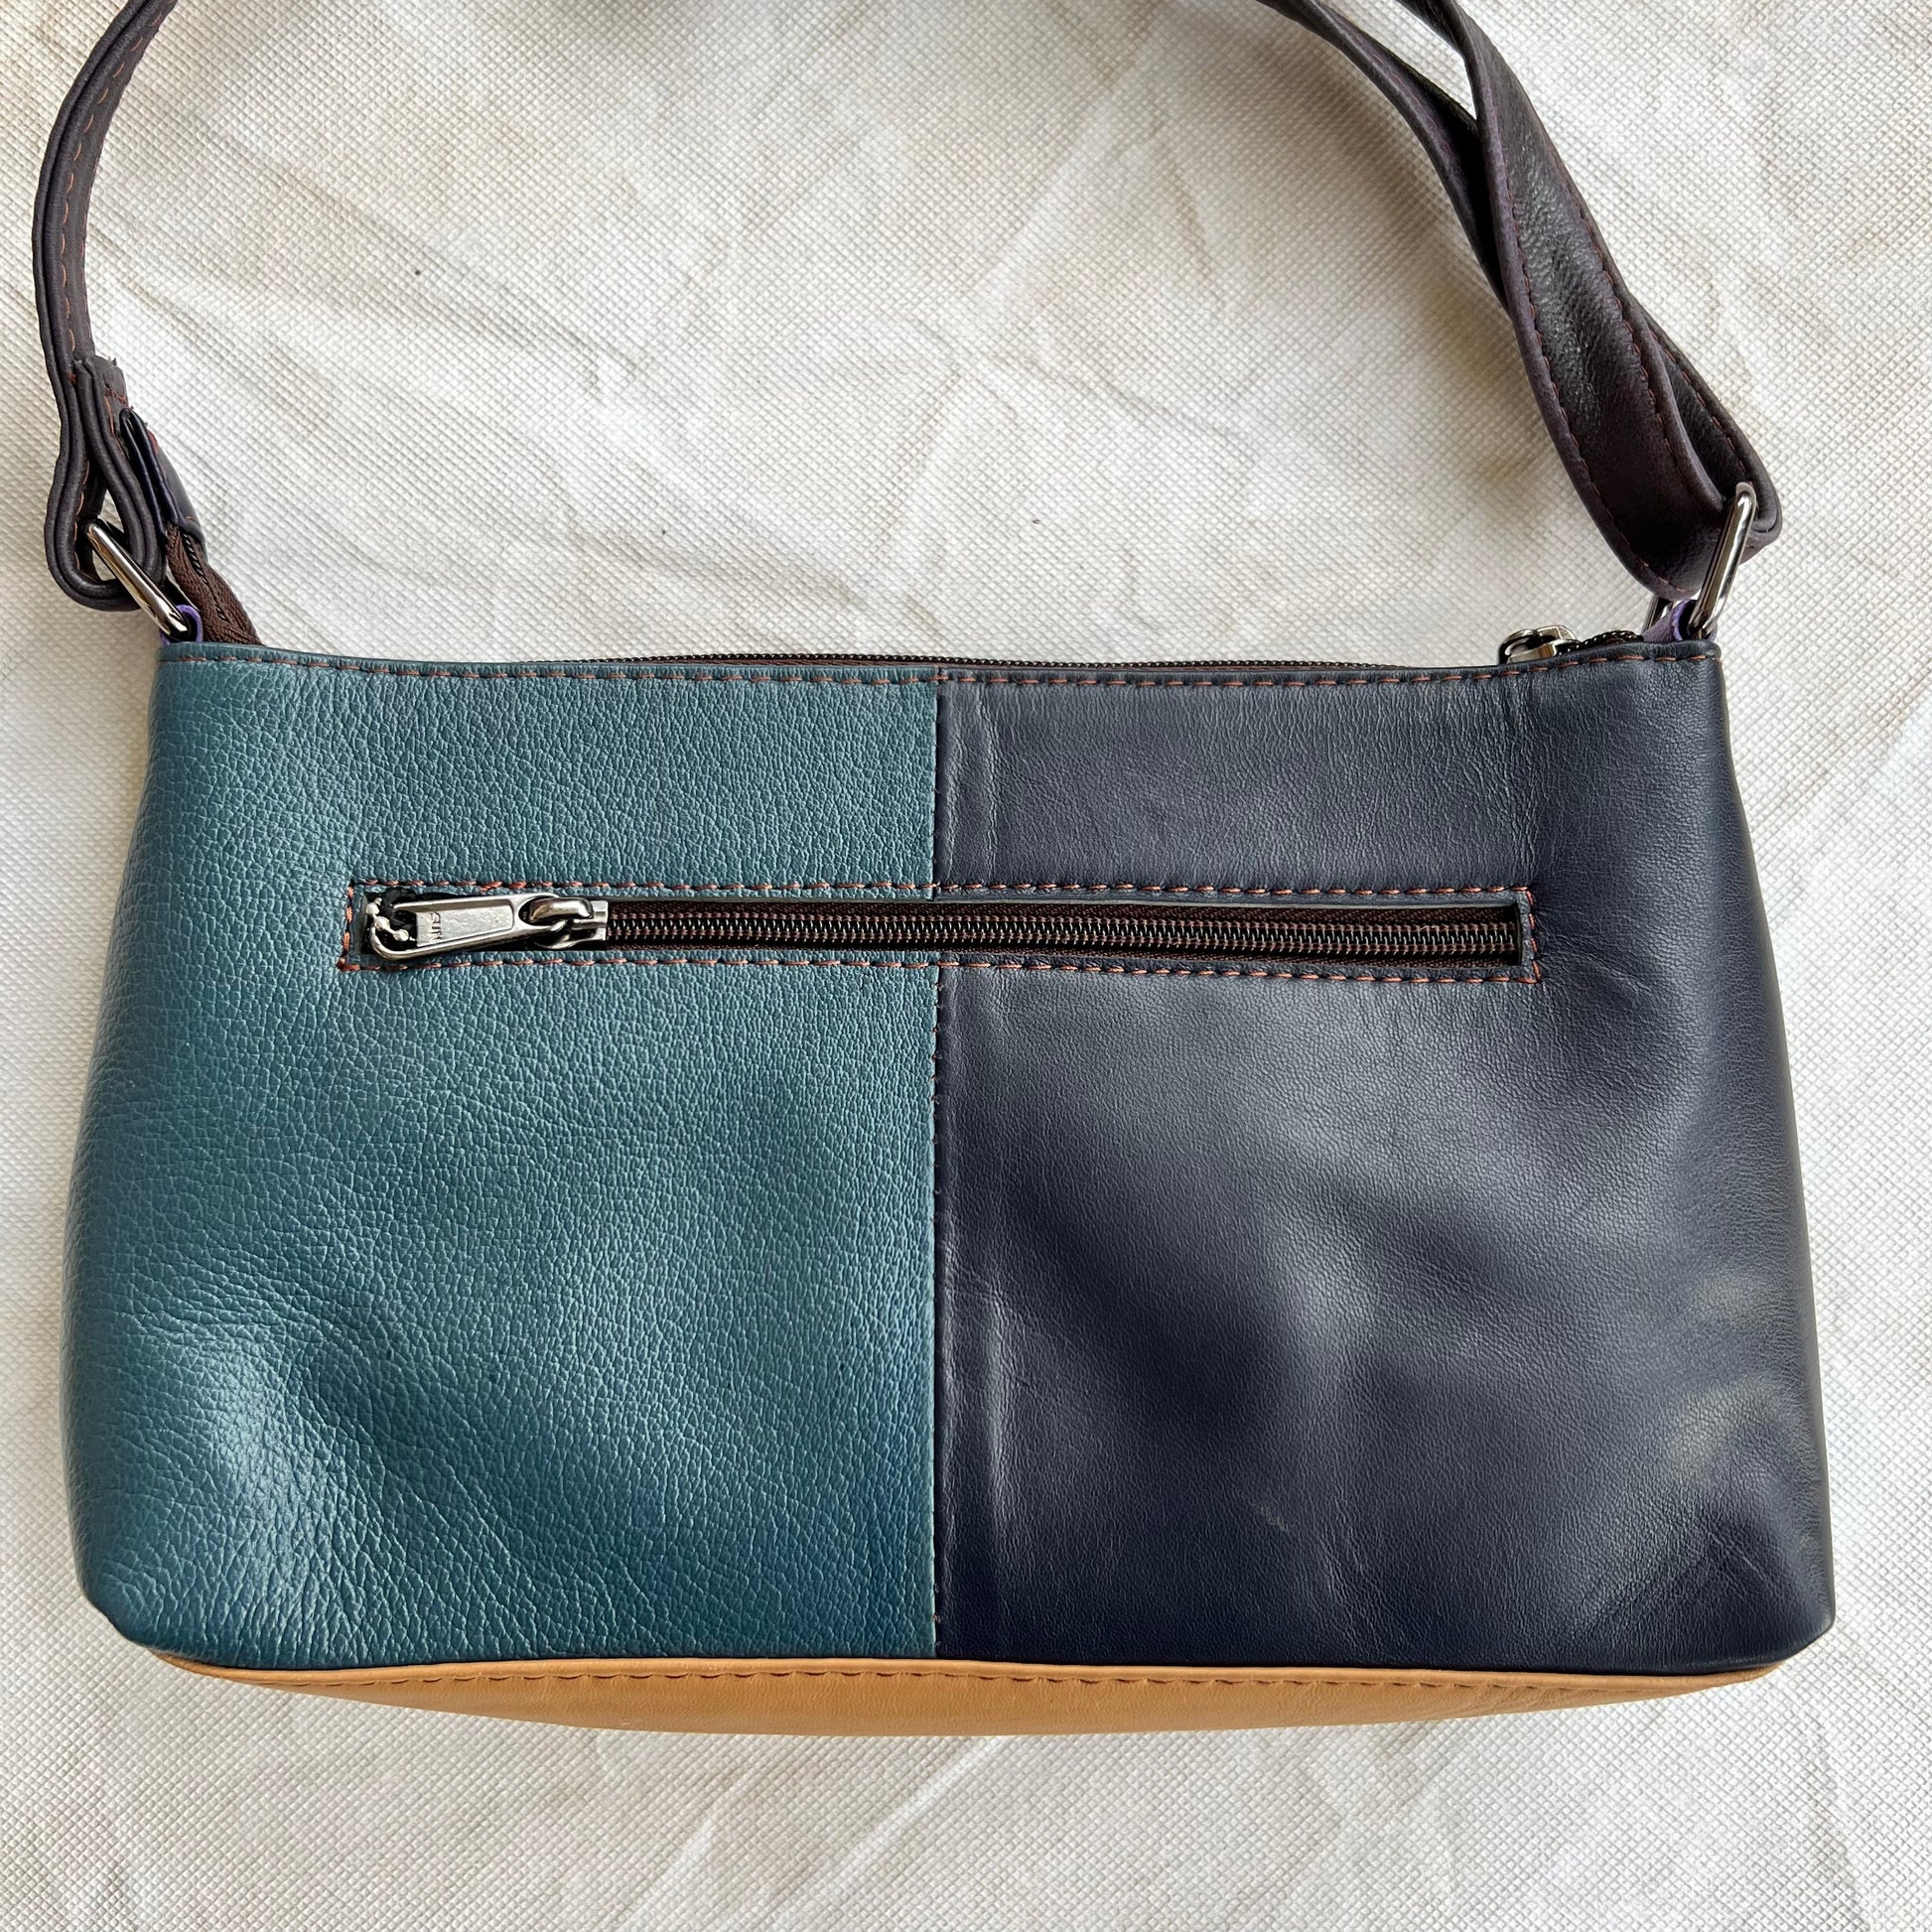 back view of purse that is half blue, half black and has a zipper pocket.